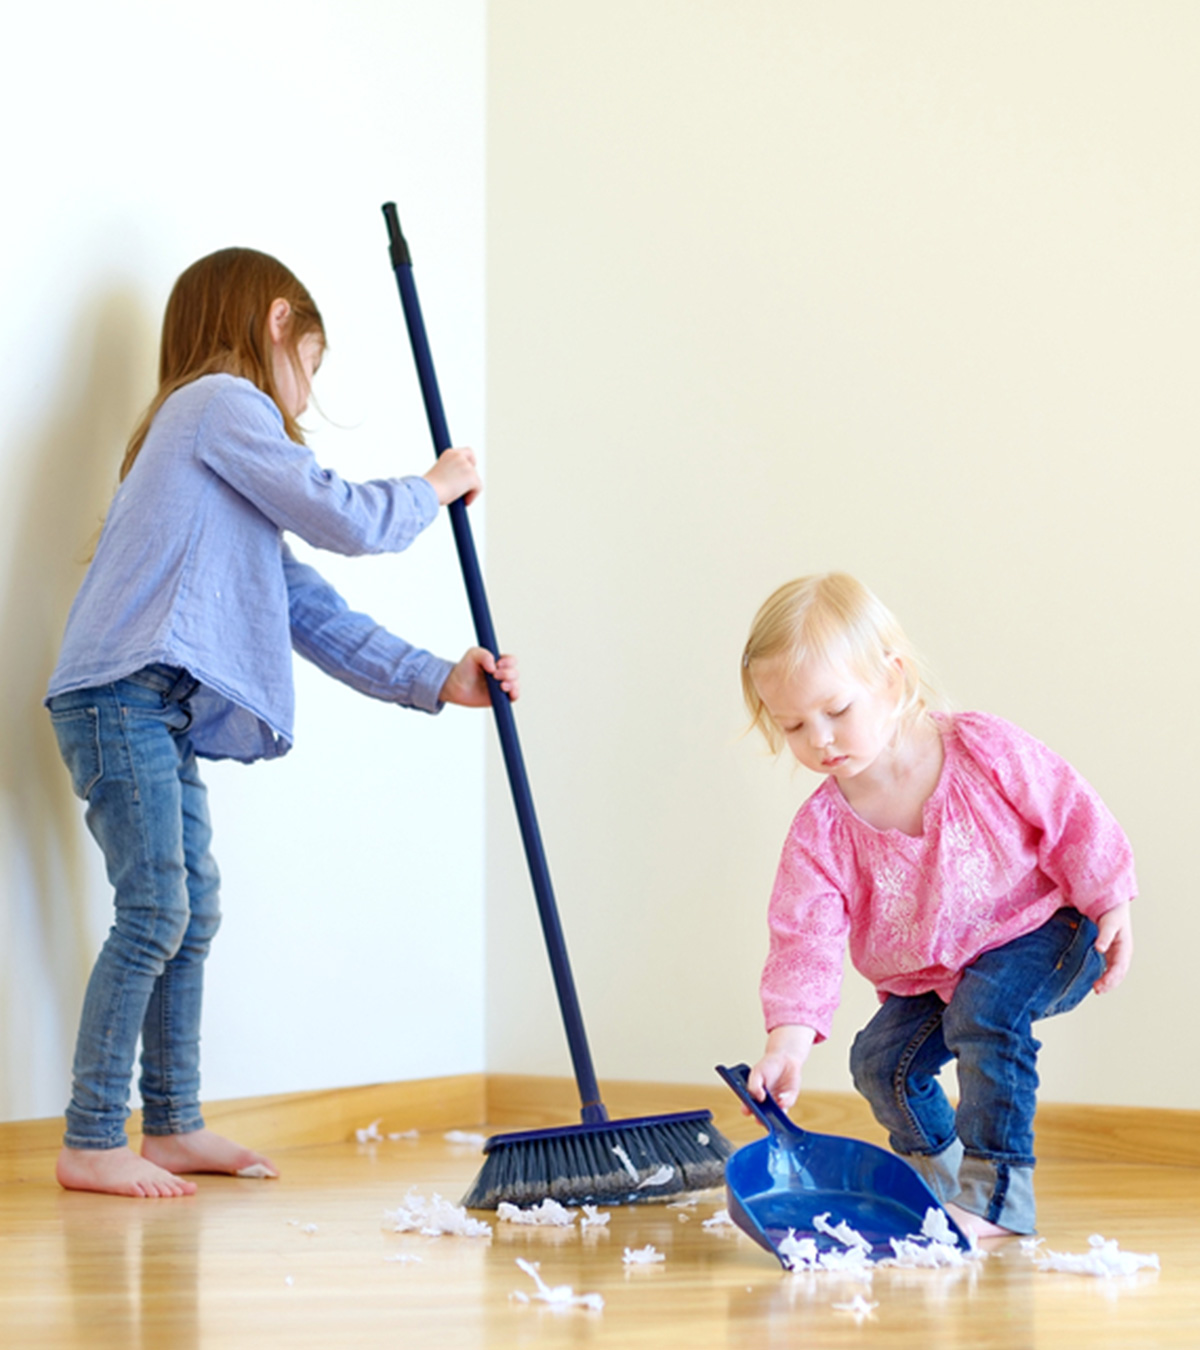 12 Best Clean Up Songs For Kids, With Lyrics